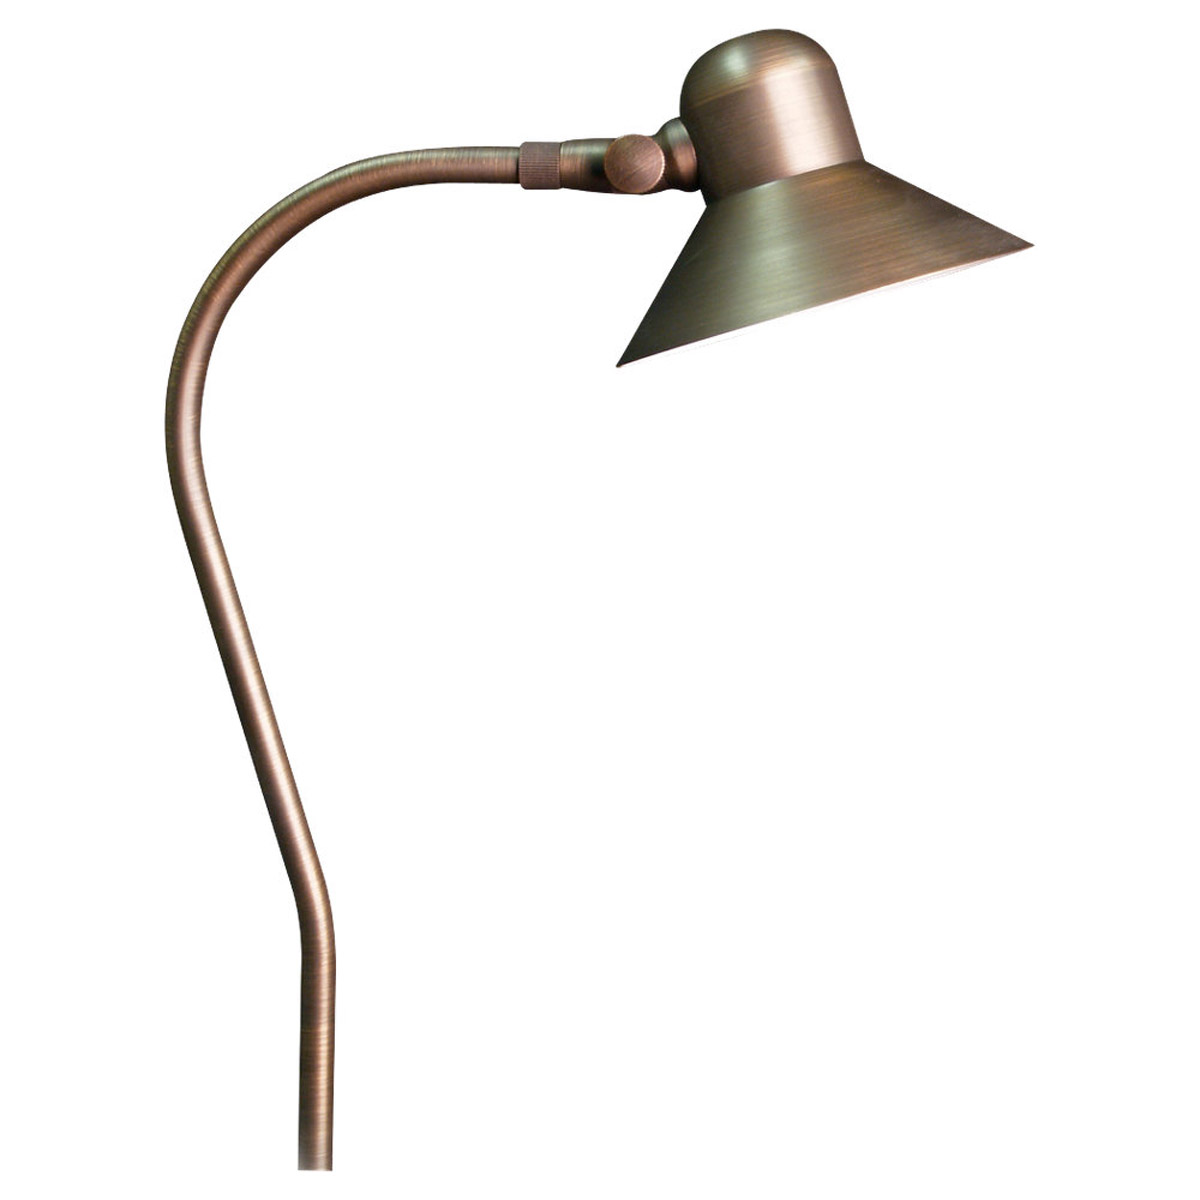 Sea Gull Lighting Imperial 1 Light Landscape Path Light in Weathered Brass 91222-147